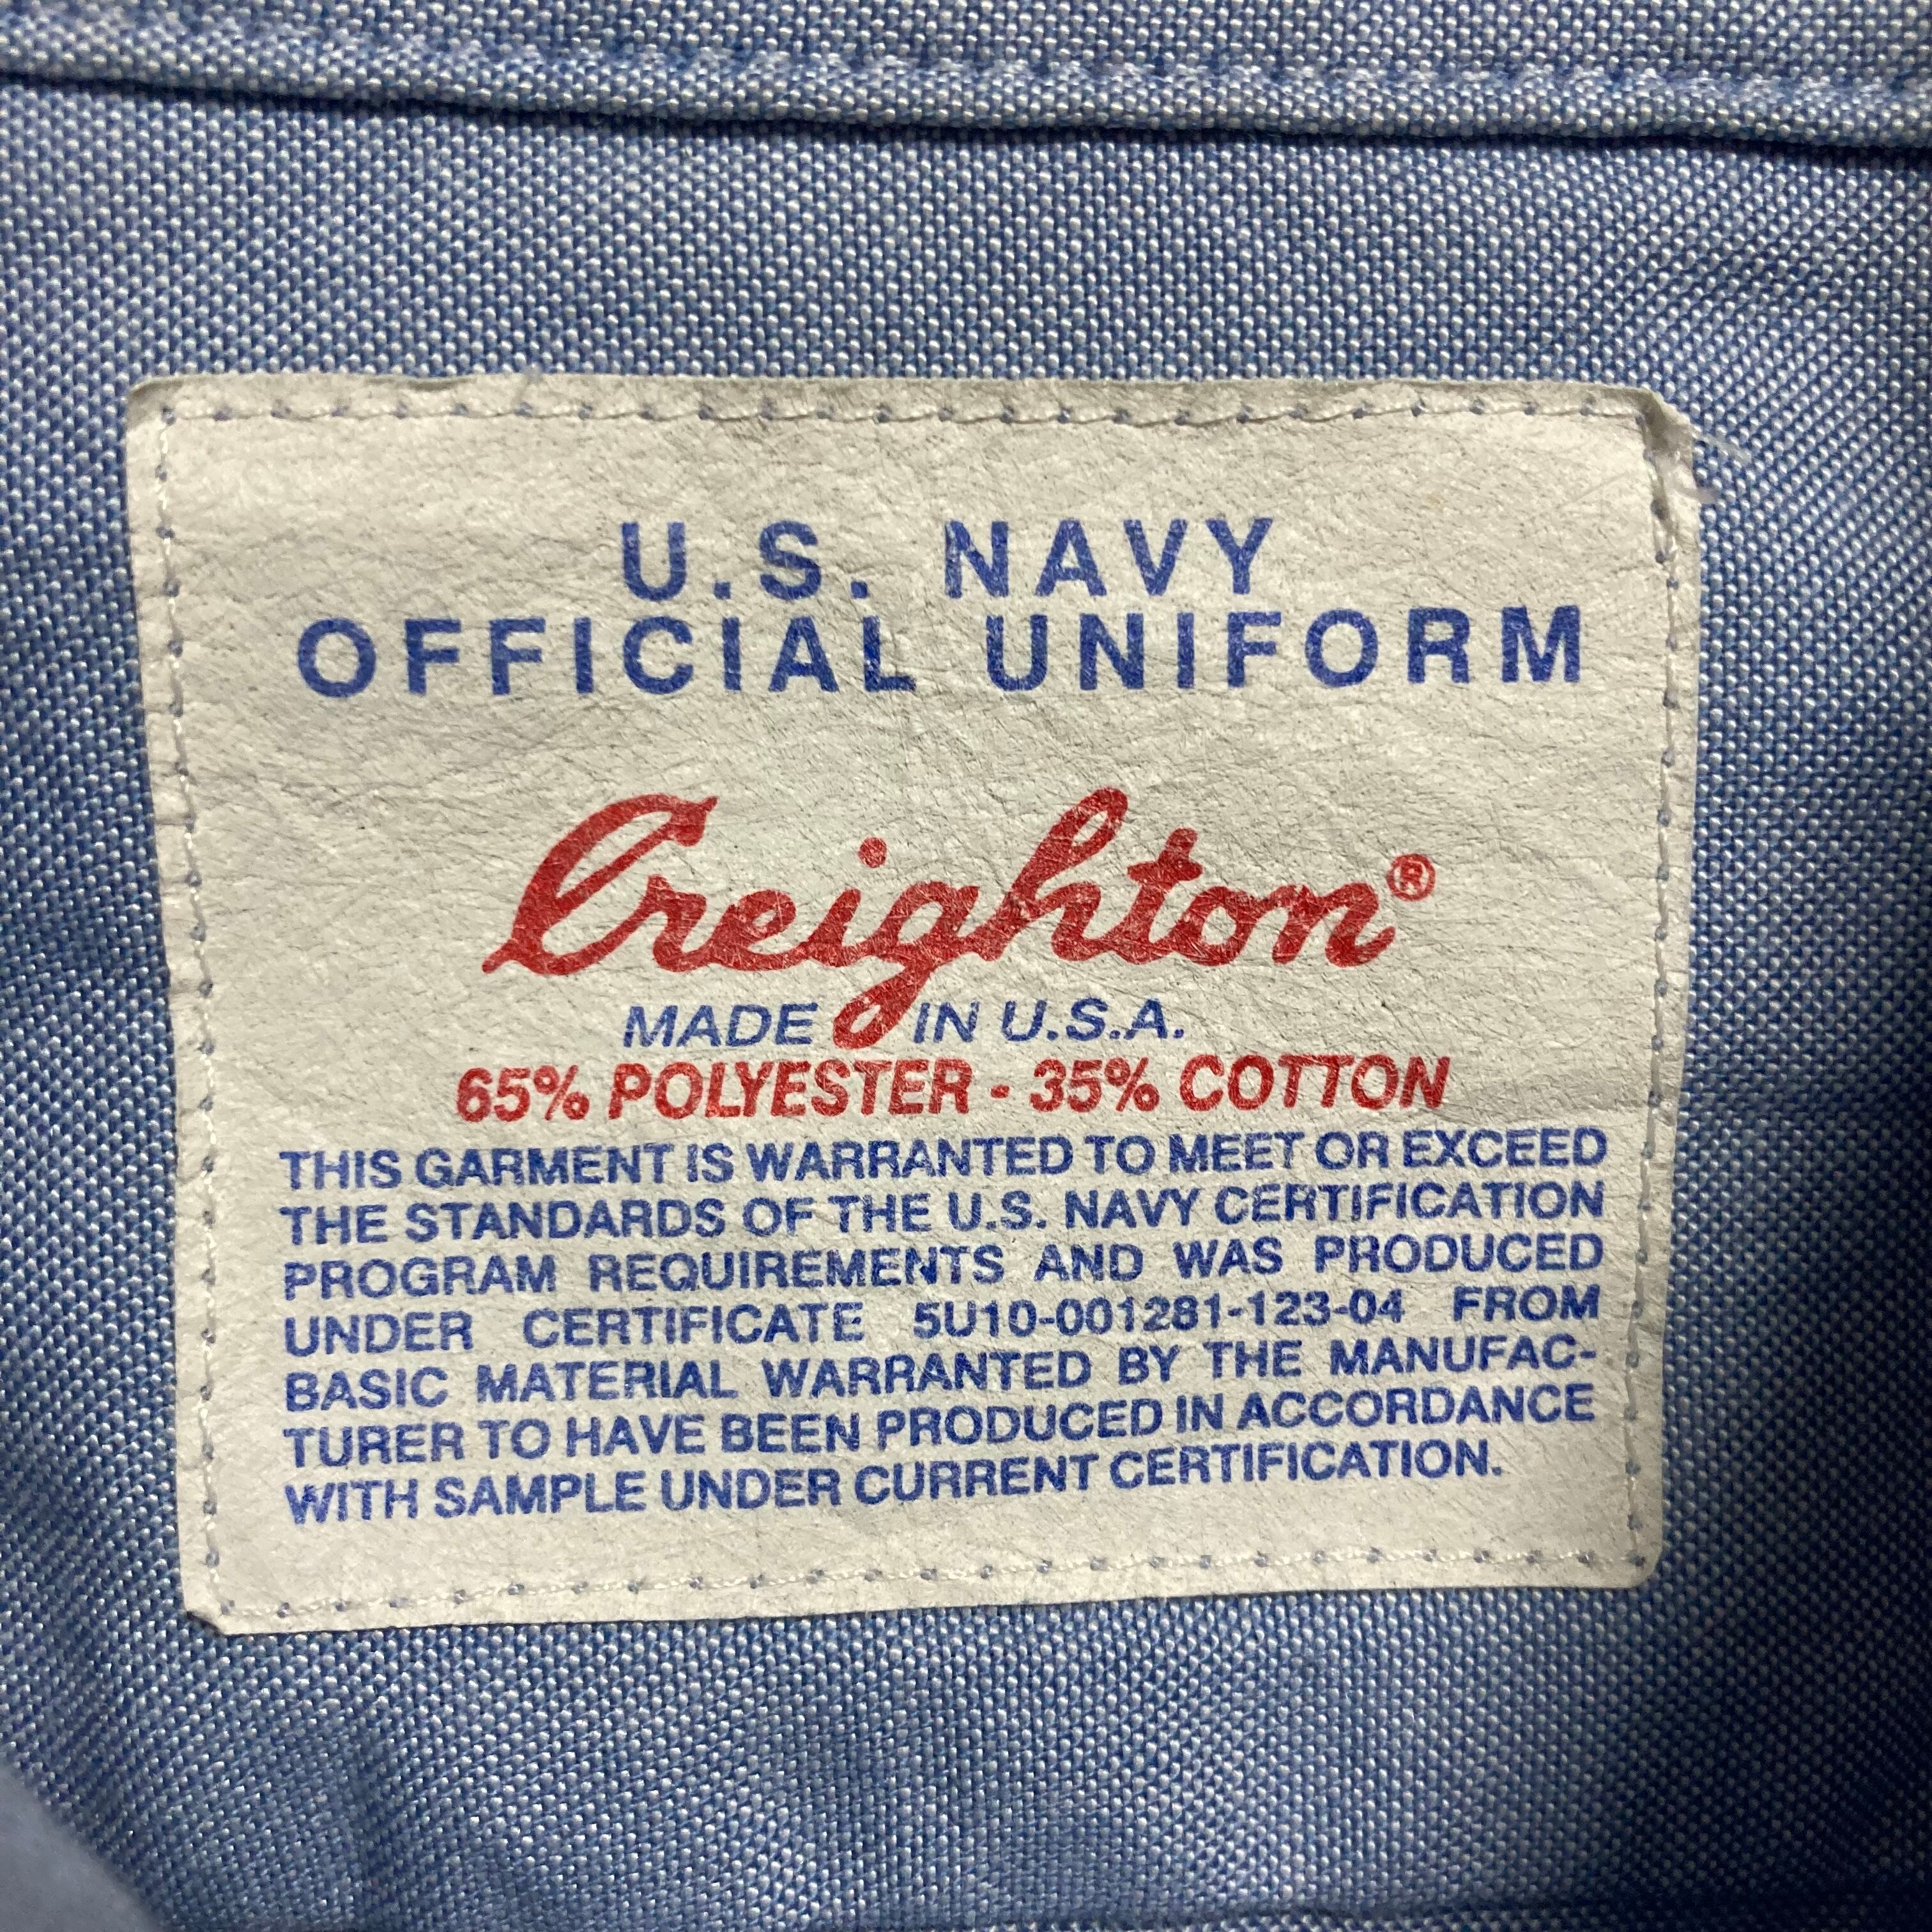 U.S.NAVY】L/S Military Shirt XL相当 Made in USA アメリカ軍 海軍 ミリタリーシャツ 長袖 刺繍ロゴ 胸ロゴ  アメリカ 古着 | Fuzzy Fuzzy